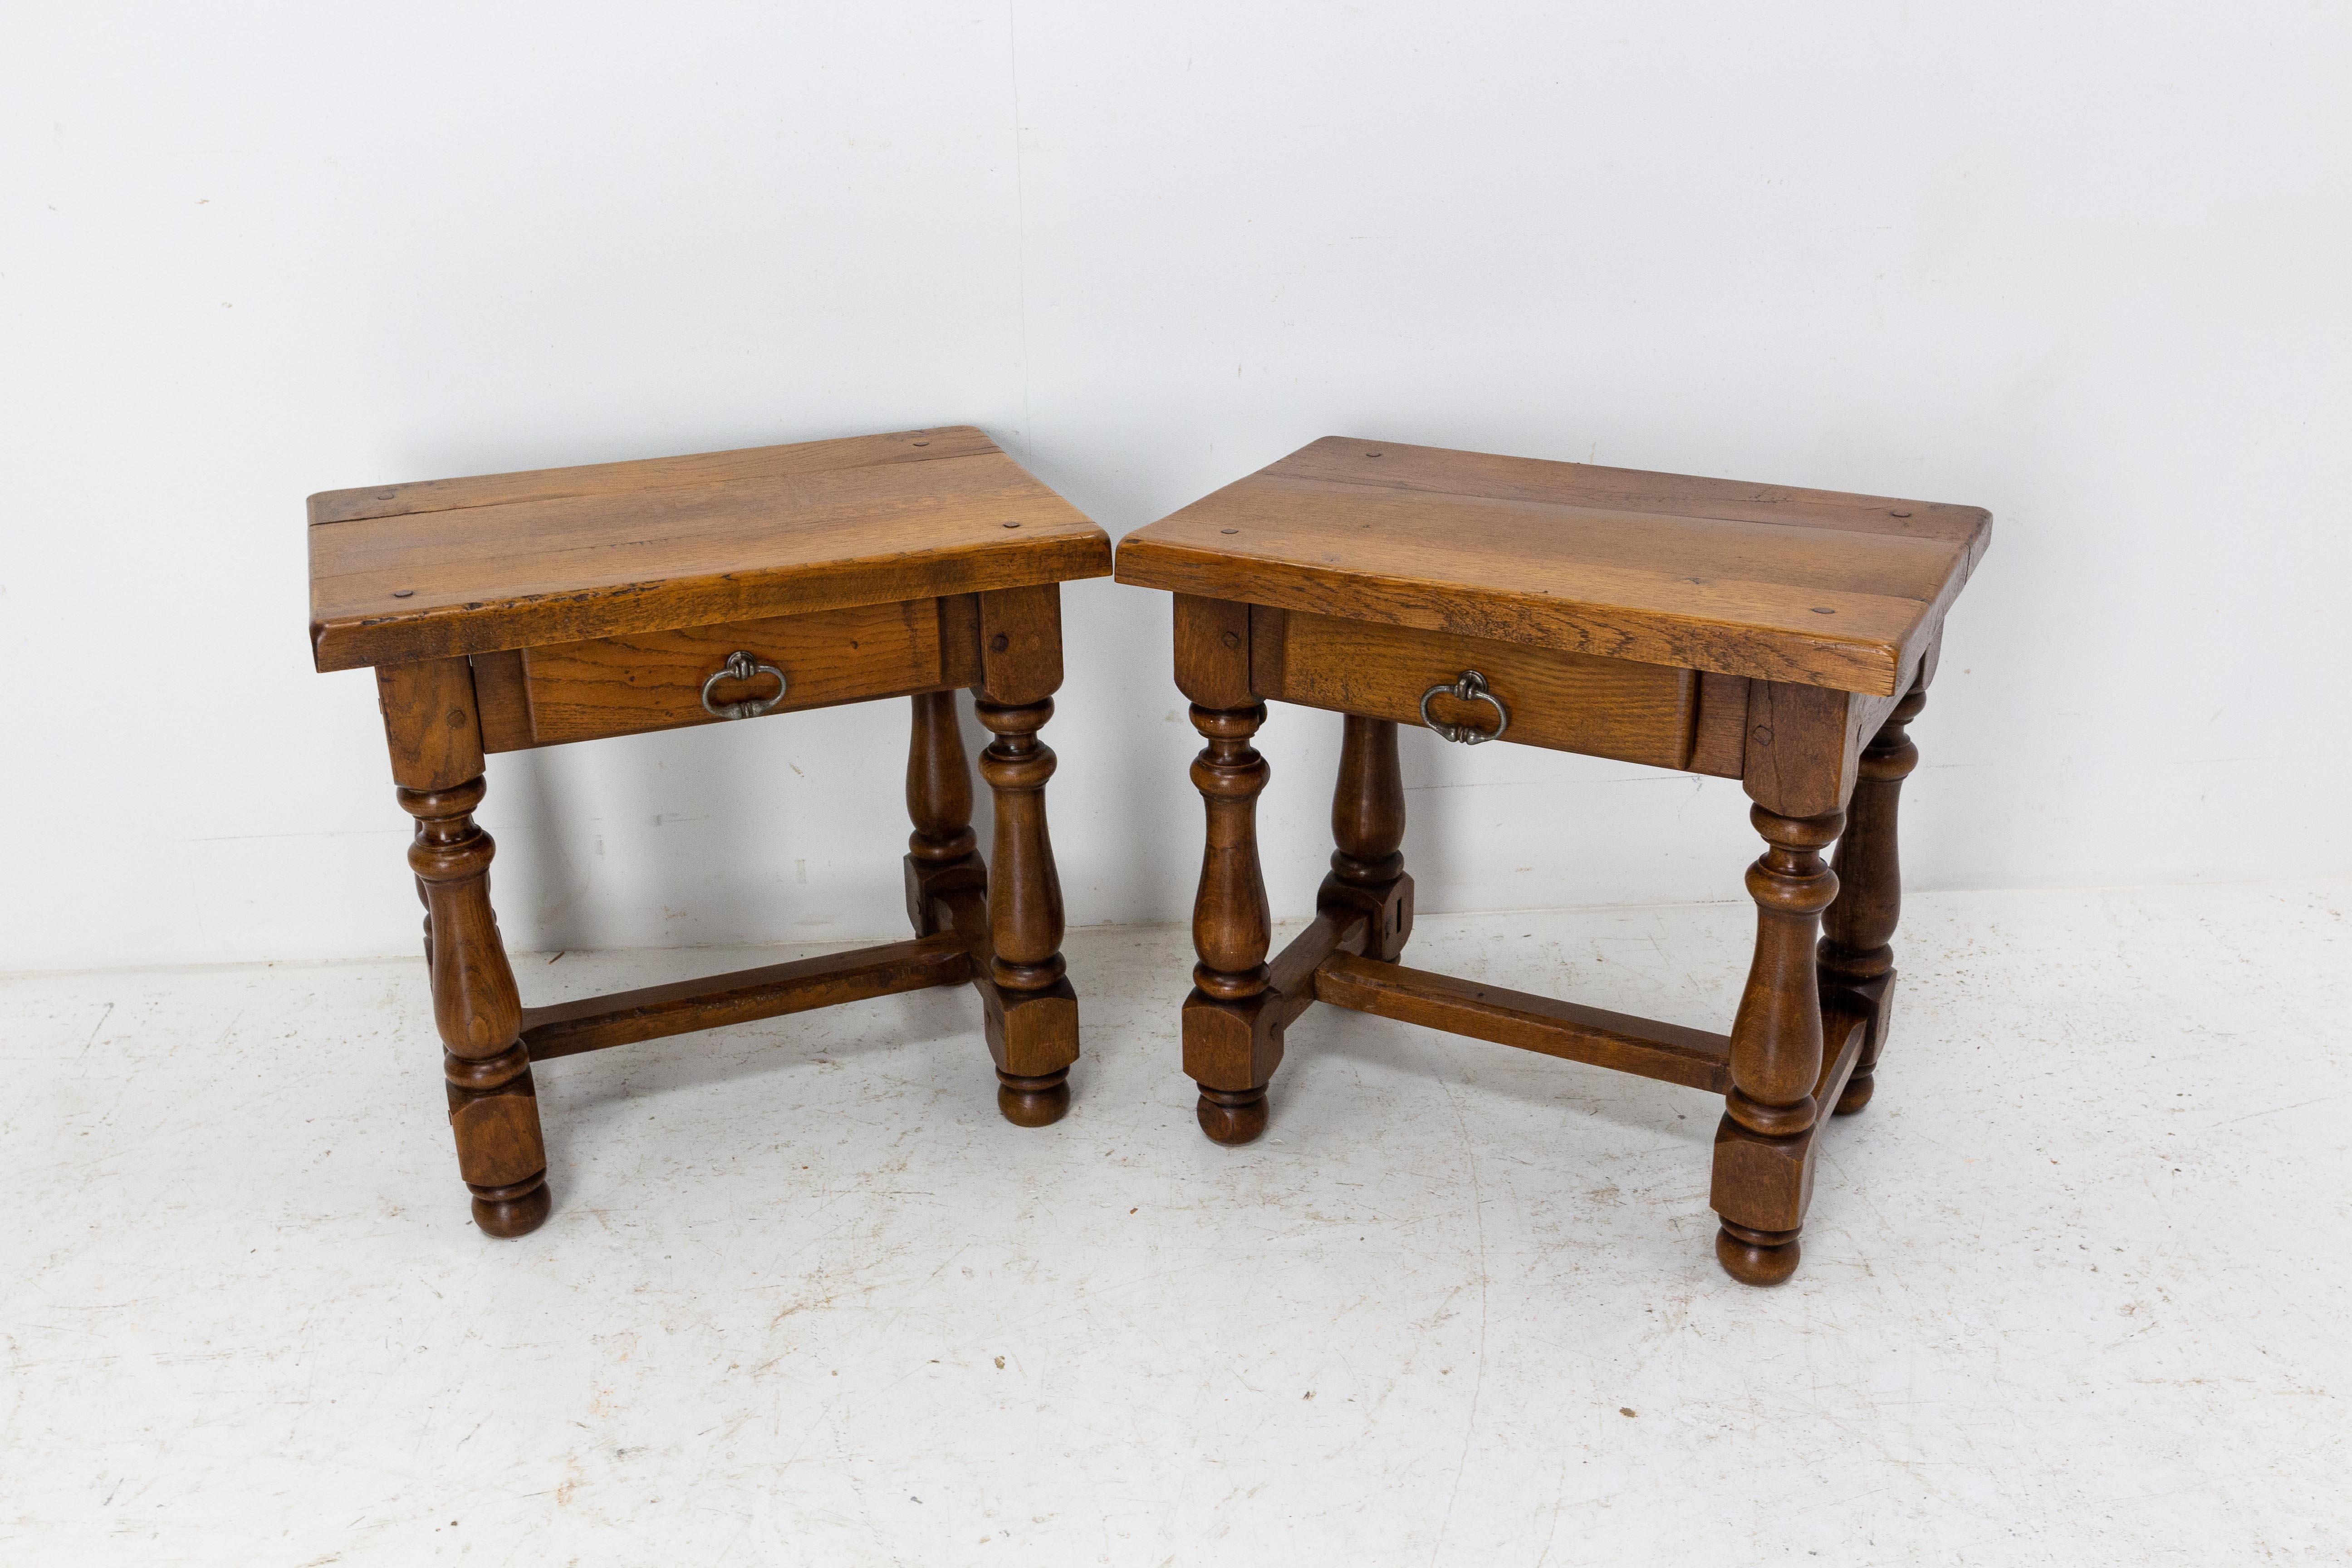 Pair of side cabinets bedside tables nightstands, one drawer
Oak and wrought iron
French mid-century, circa 1970
Good condition 

Shipping:
L73 P53 H48 21Kg.